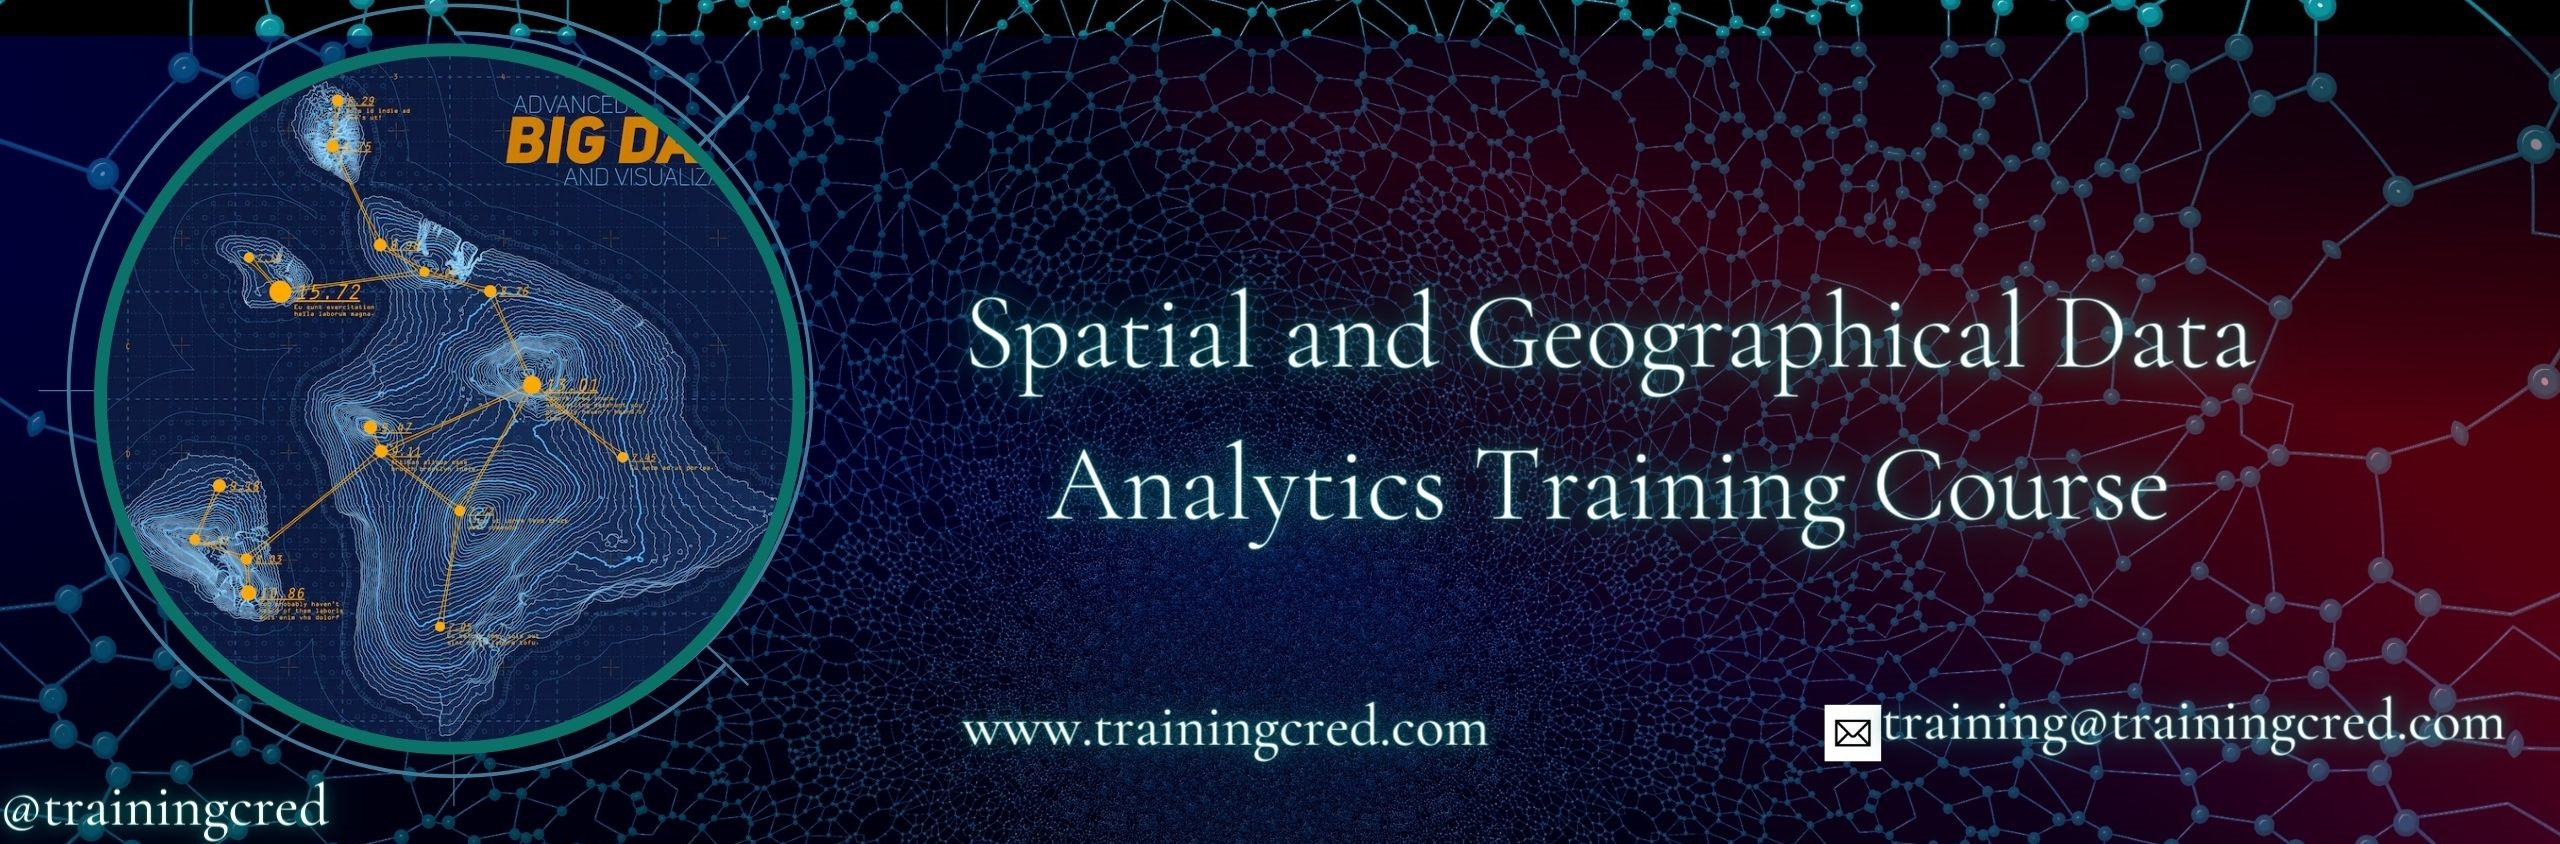 Spatial and Geographical Data Analytics Training